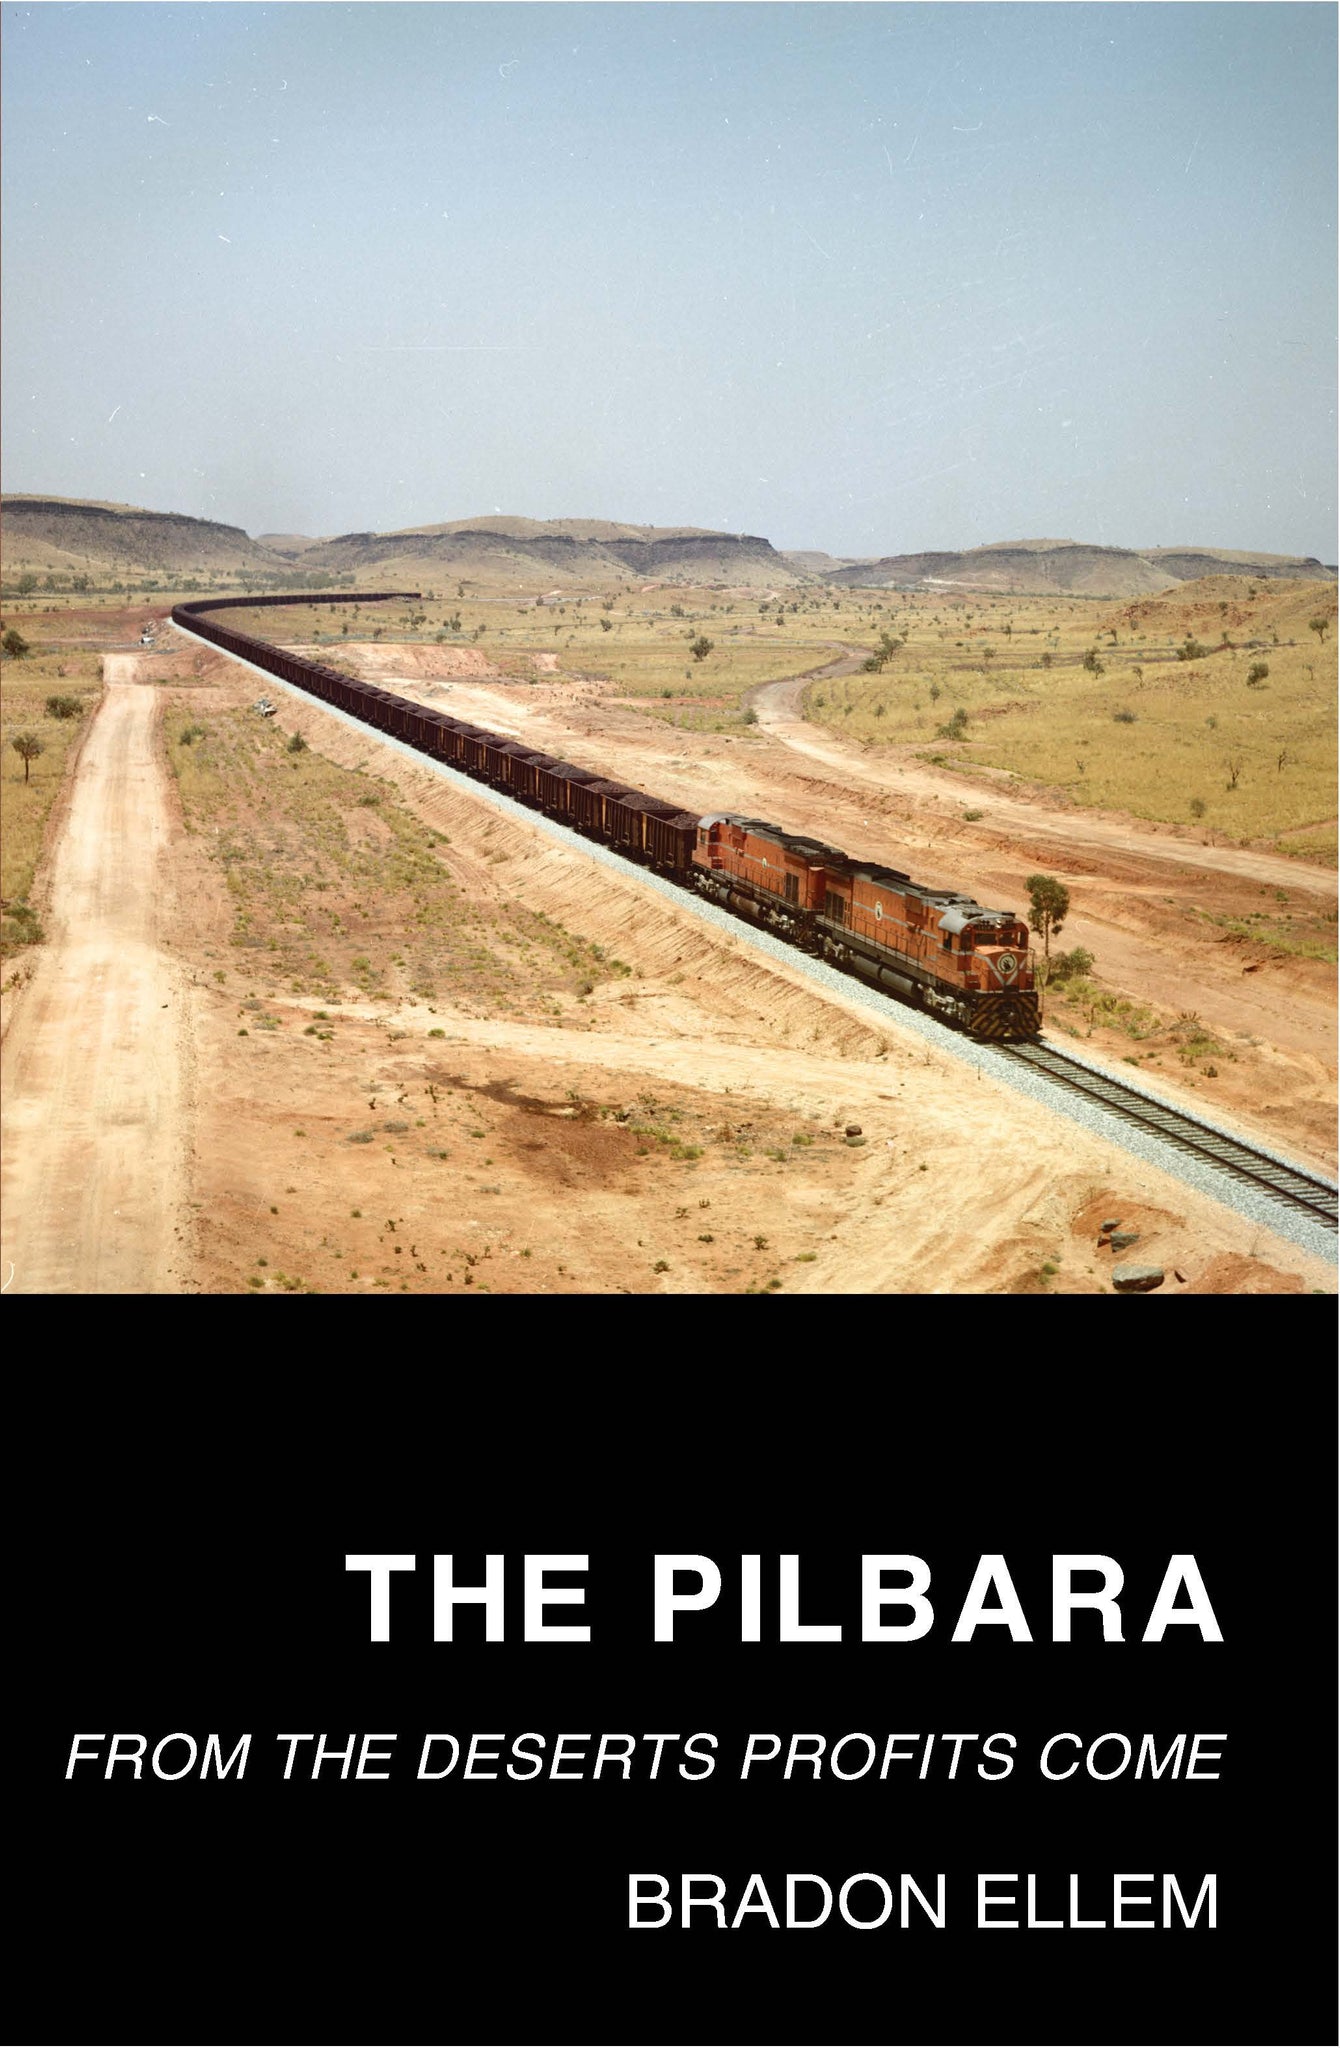 The Pilbara: From the Deserts Profits Come